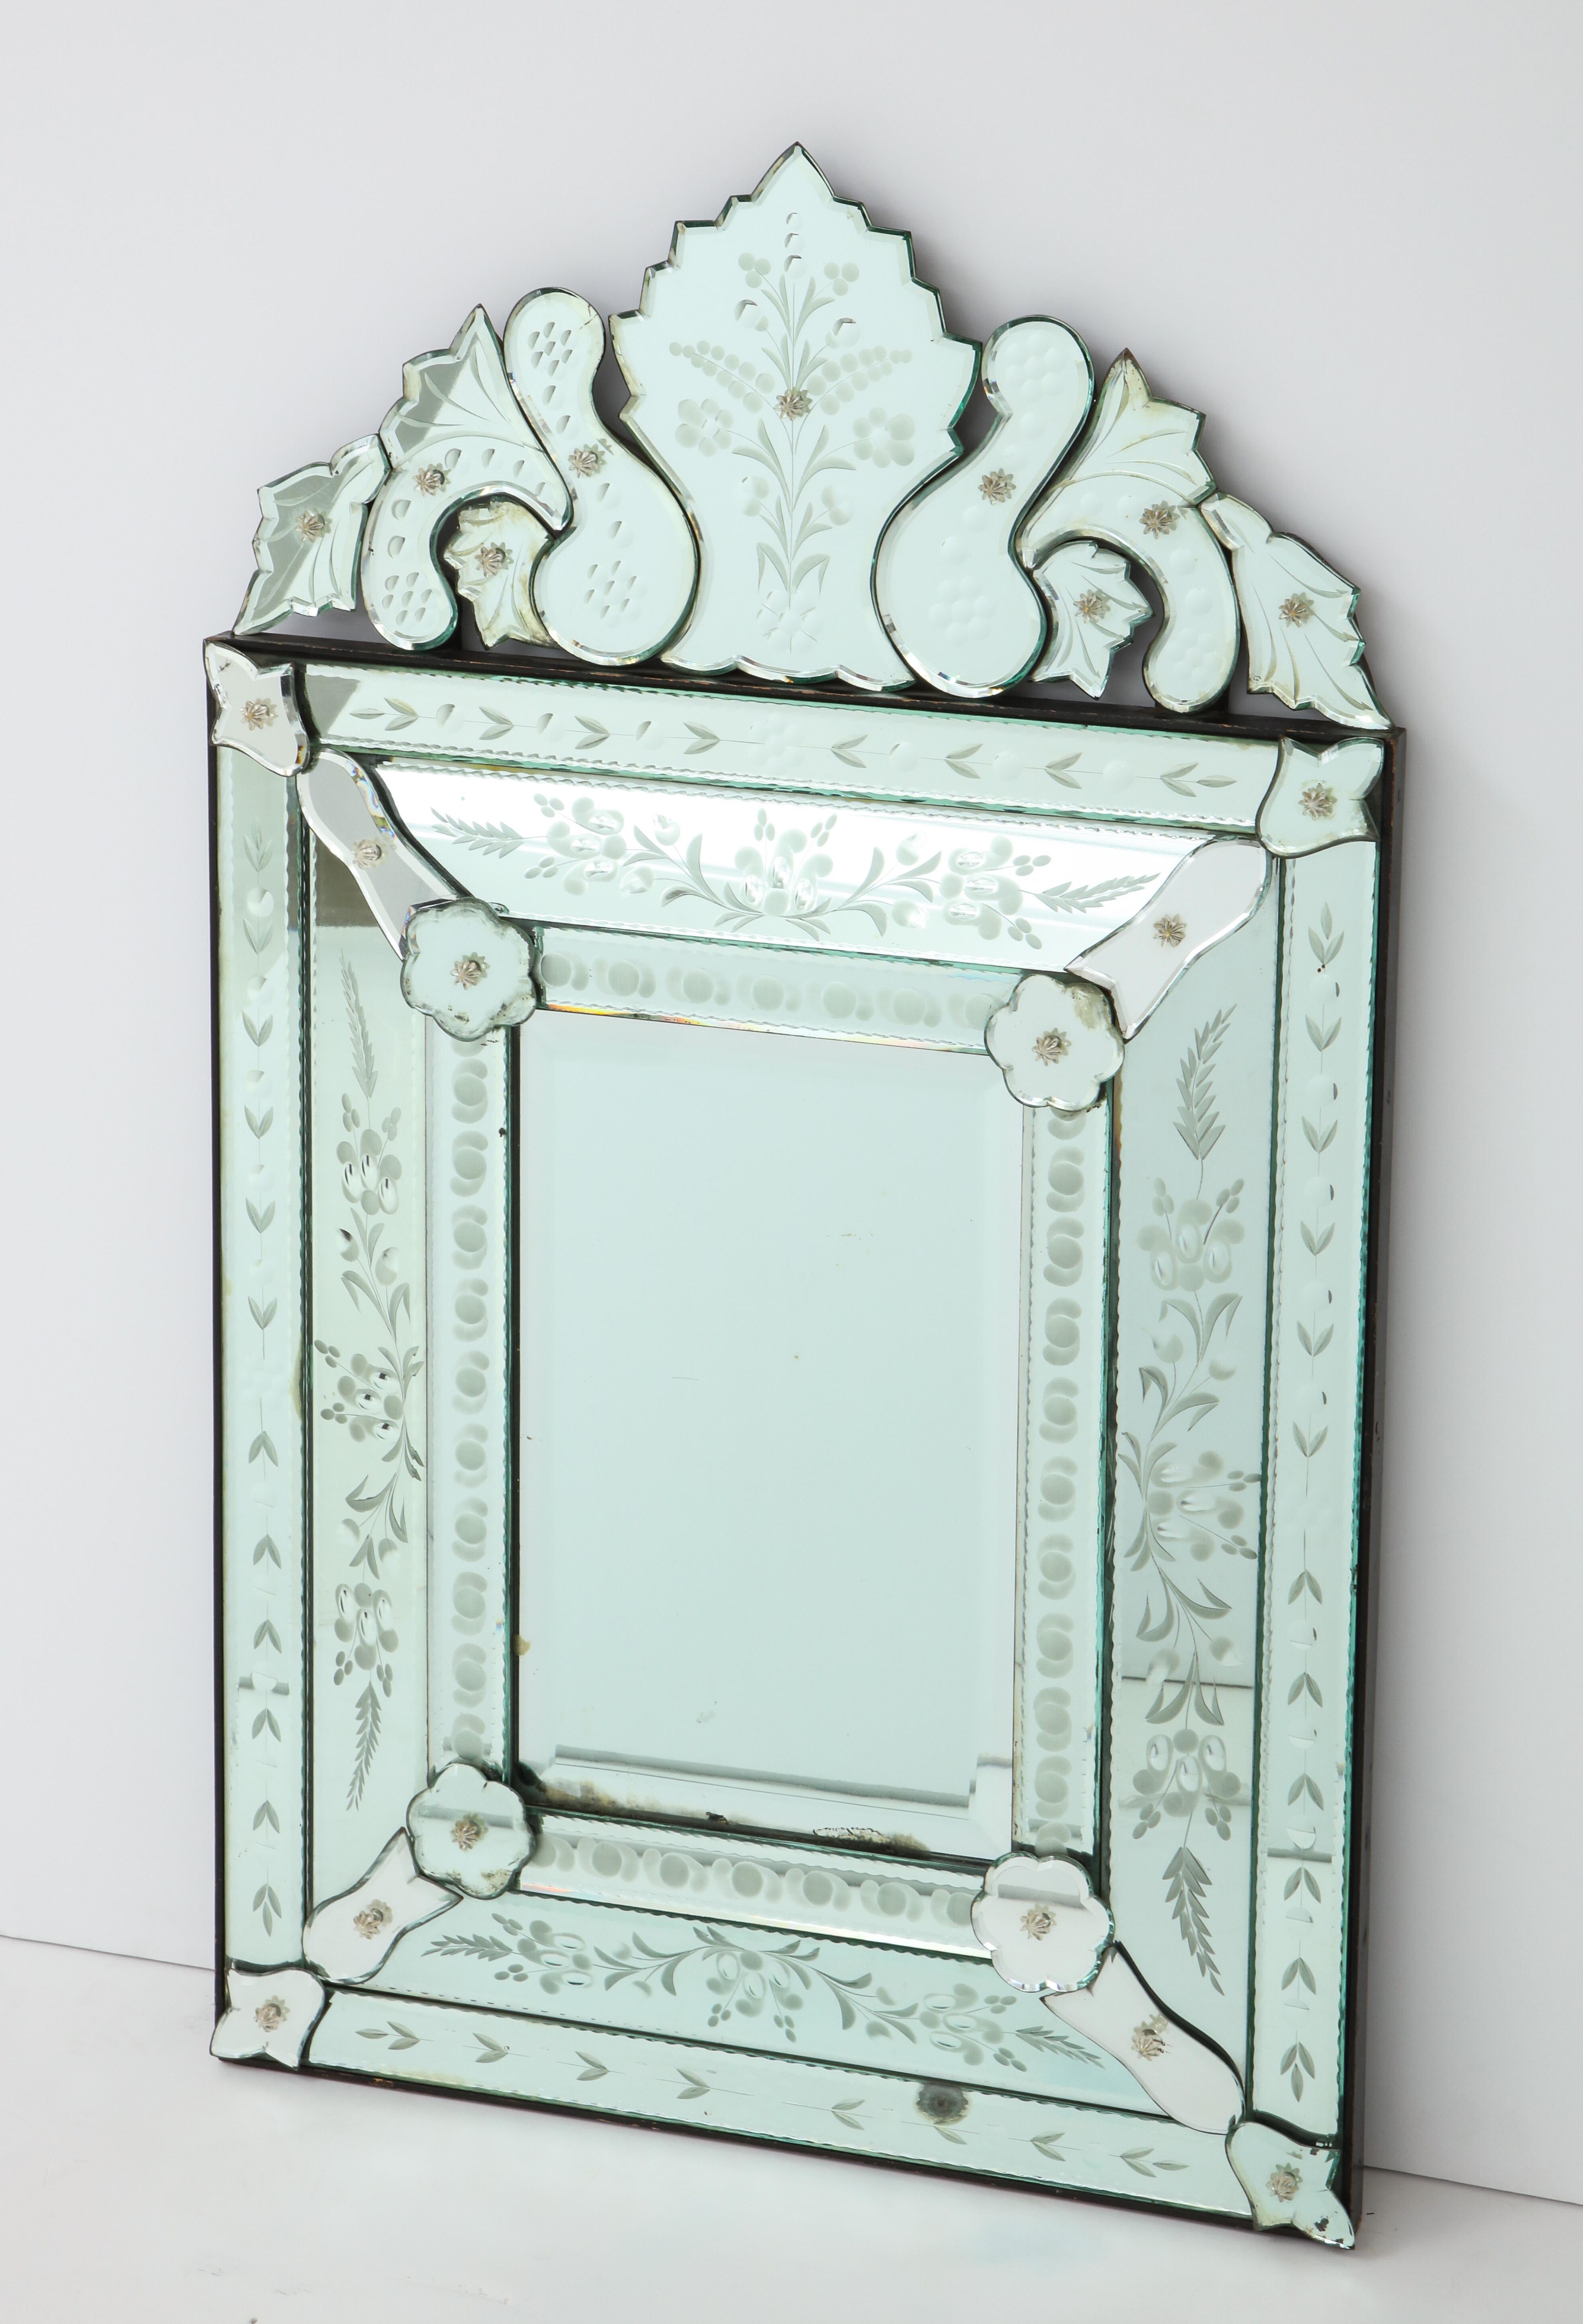 Fantastic Venetian mirror with wheel cut etched floral borders and chain beveled borders mounted on wood. All glass rosette screw covers are intact.